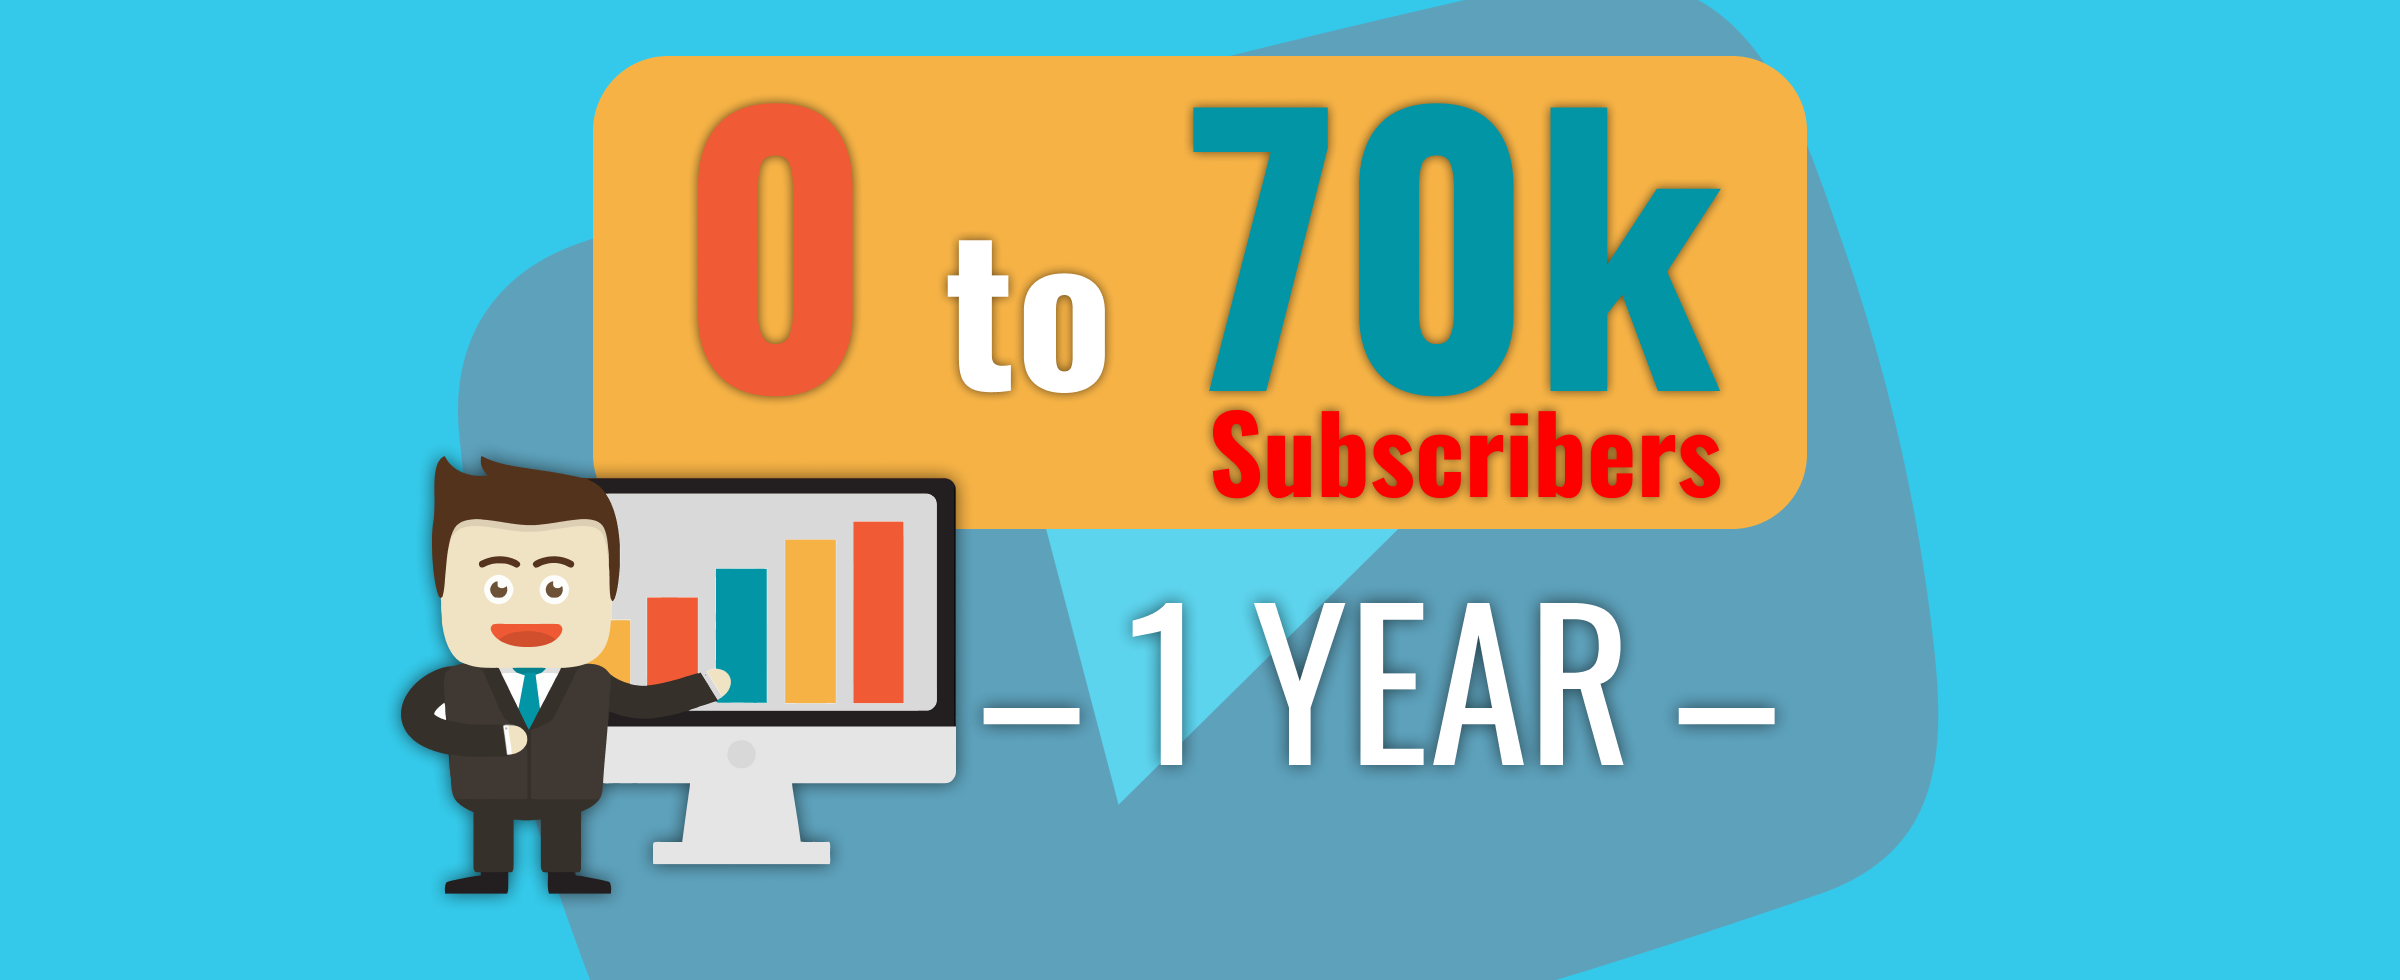 How I Went From 0 to 70k Subscribers on YouTube in 1 Year – And How Much